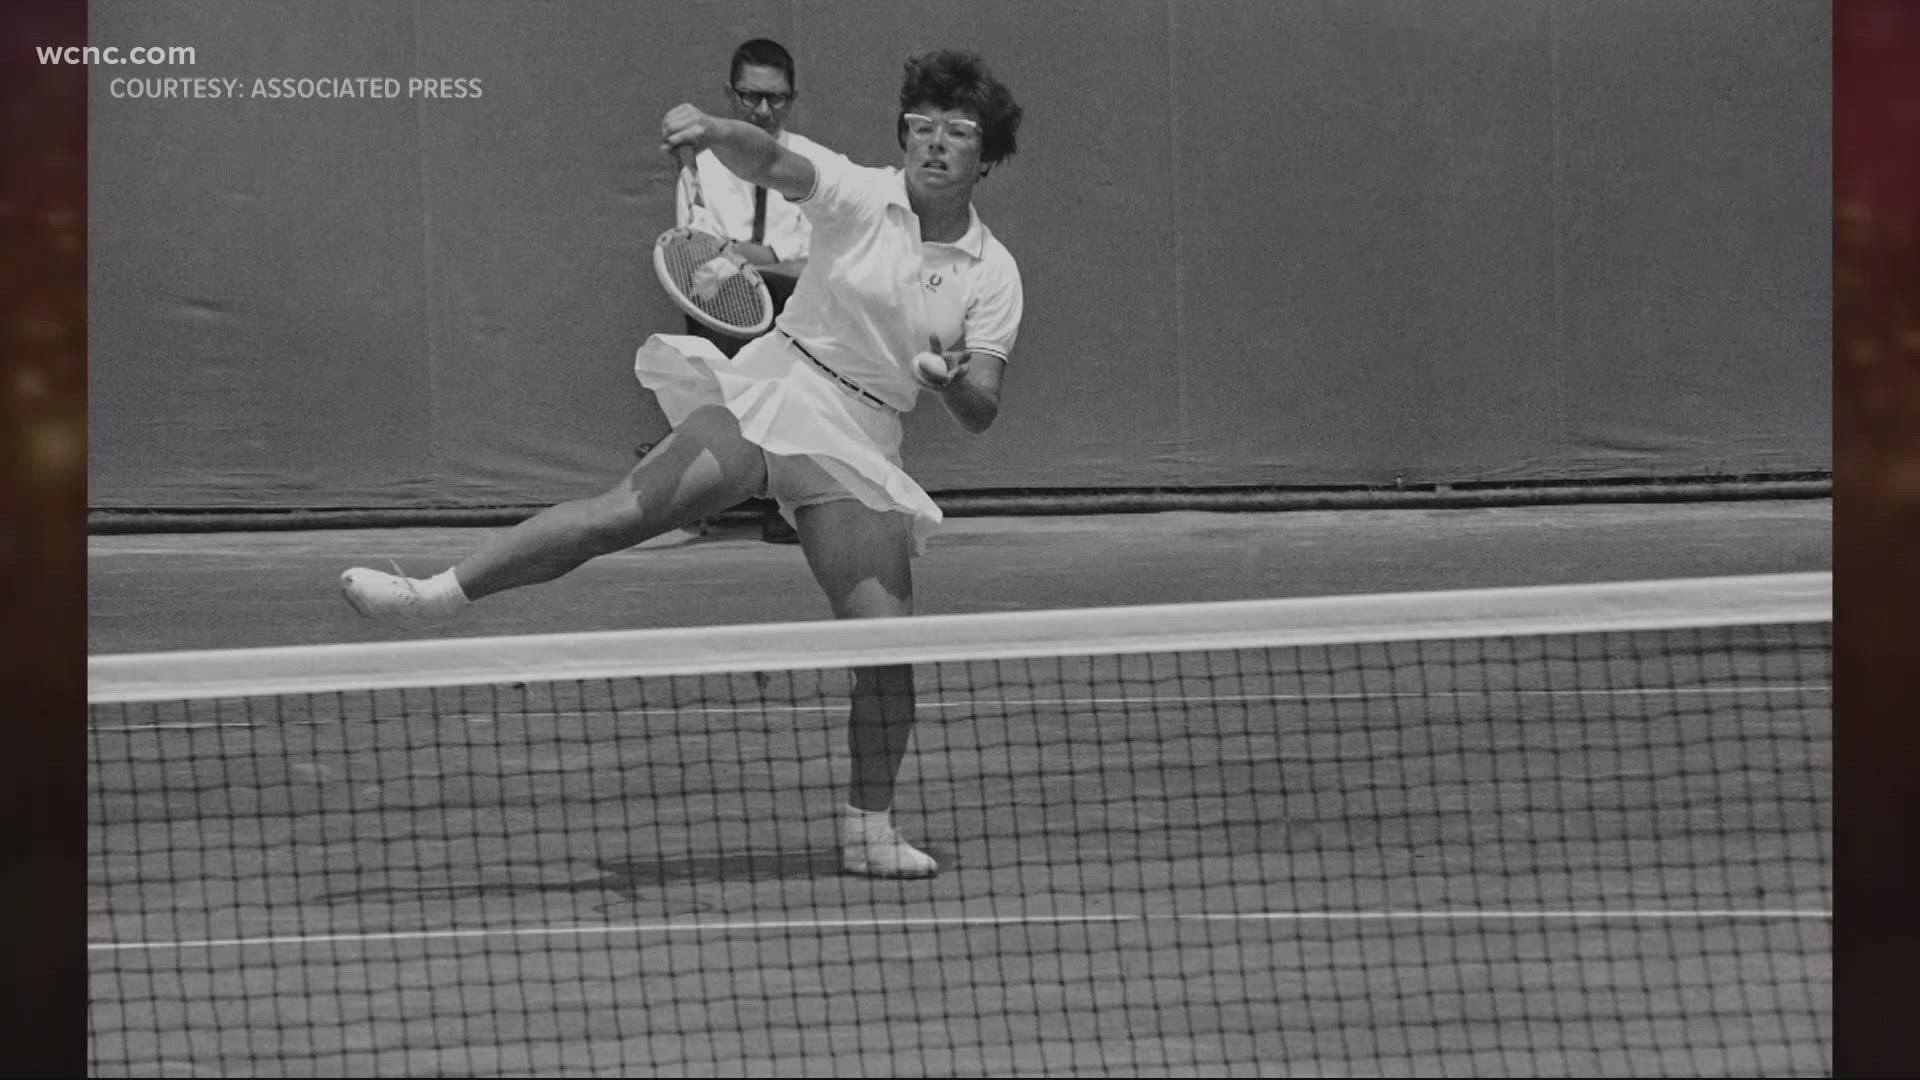 King holds 39 Grand Slam titles. She simultaneously fought her court victories as well as equality in women's prize money.